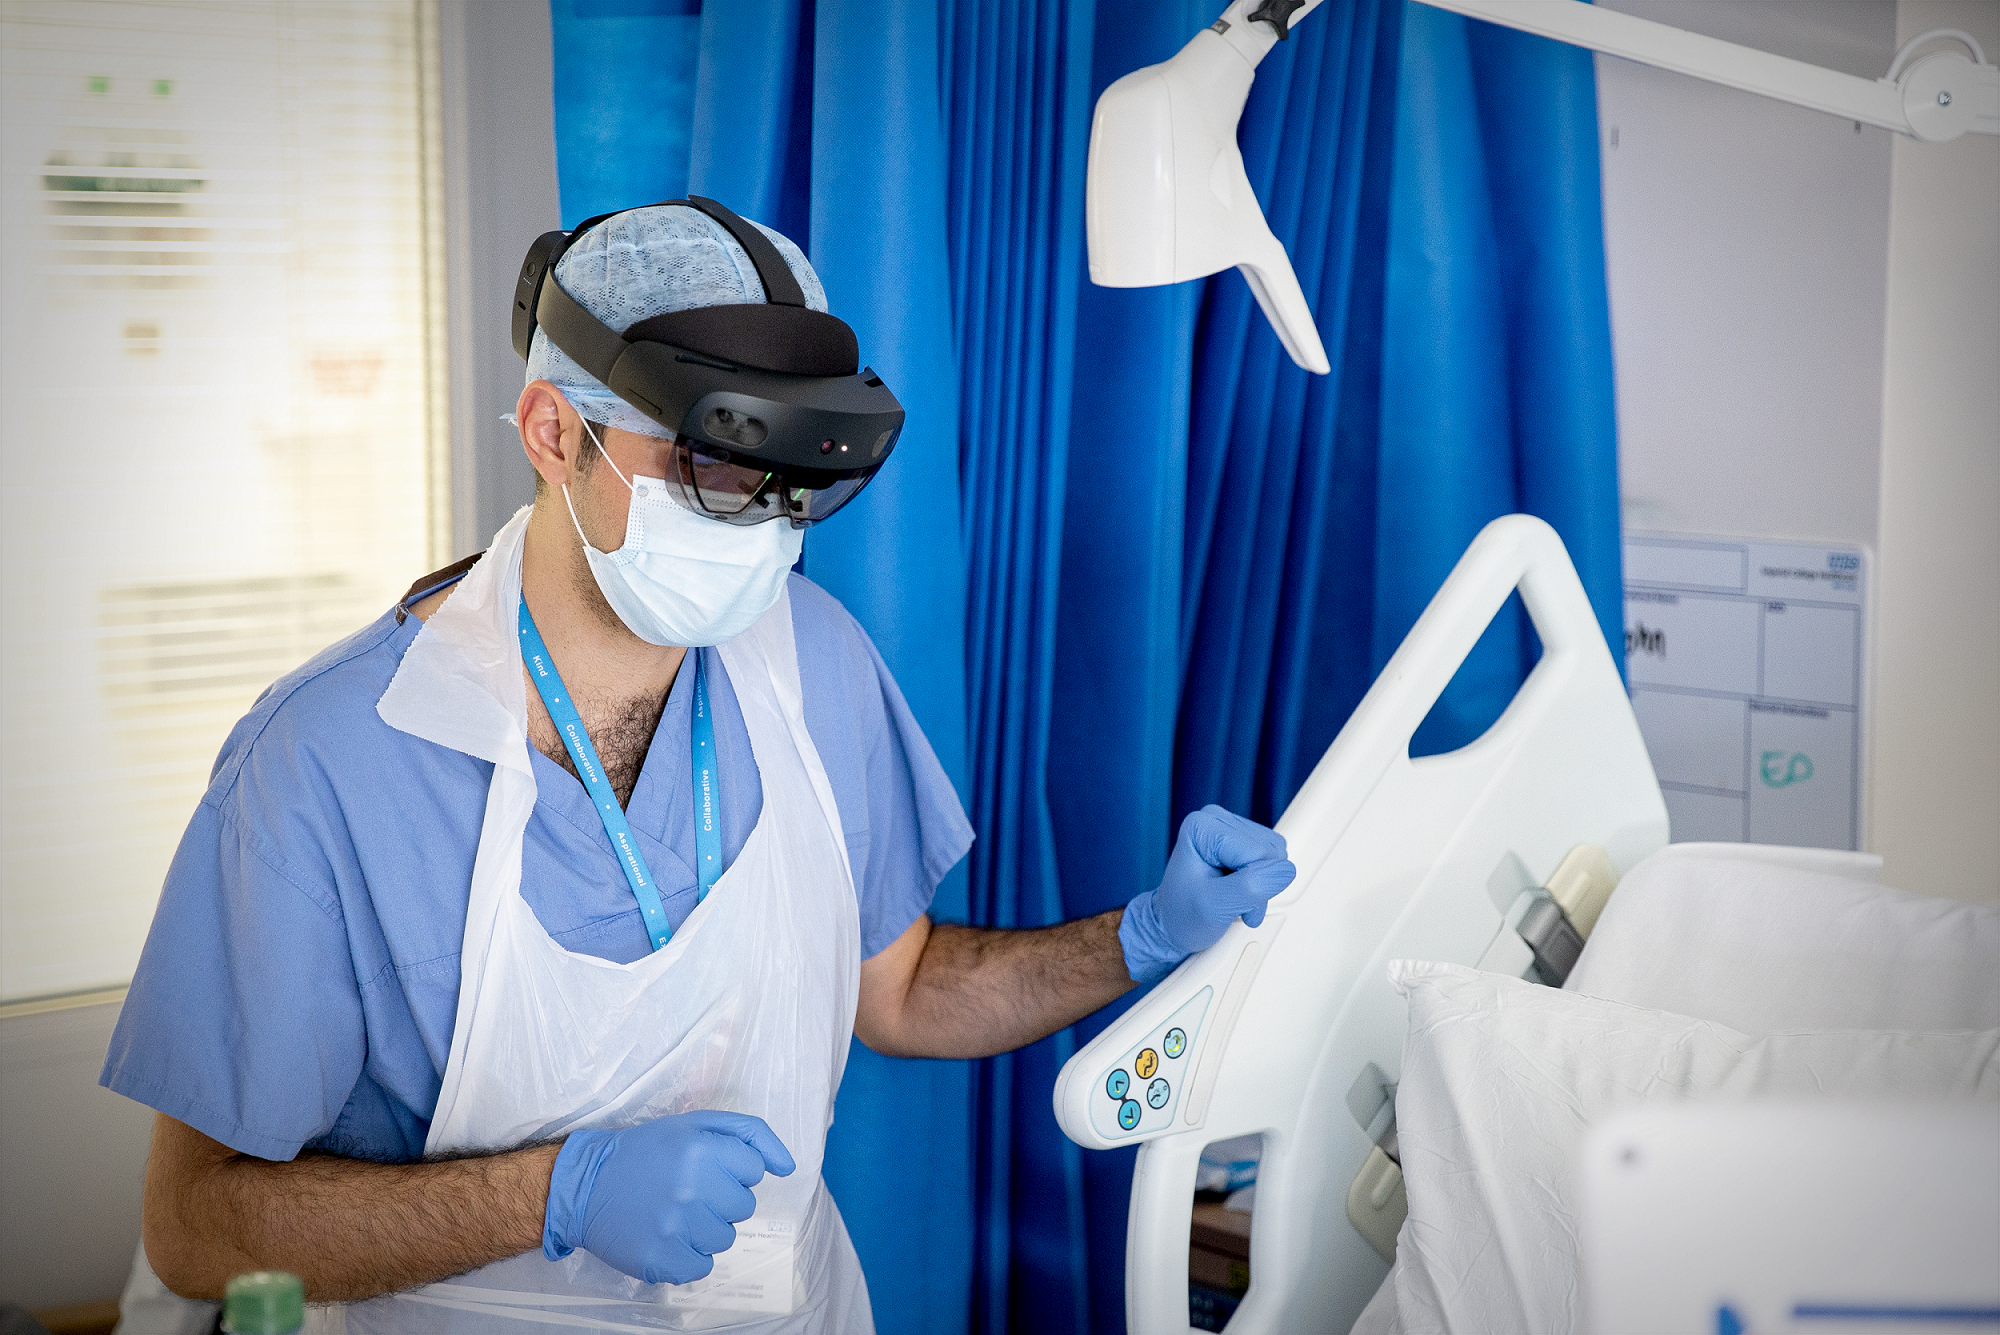 Male hospital worker stands beside a hospital bed, wearing a HoloLens headset.